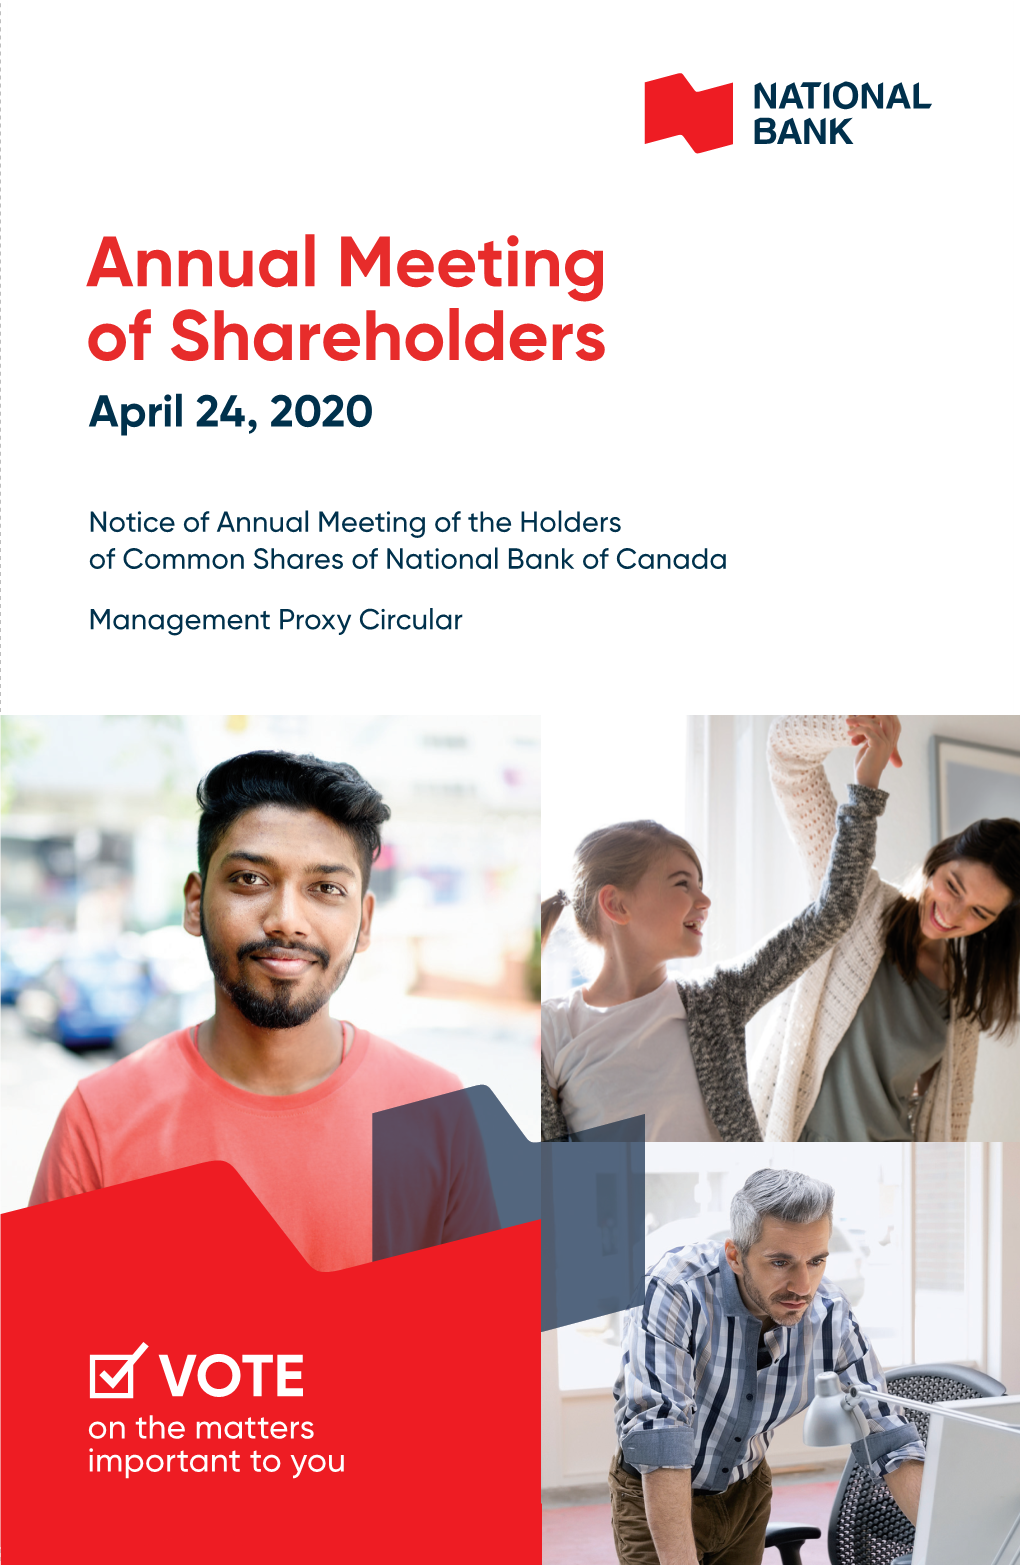 Annual Meeting of Shareholders April 24, 2020